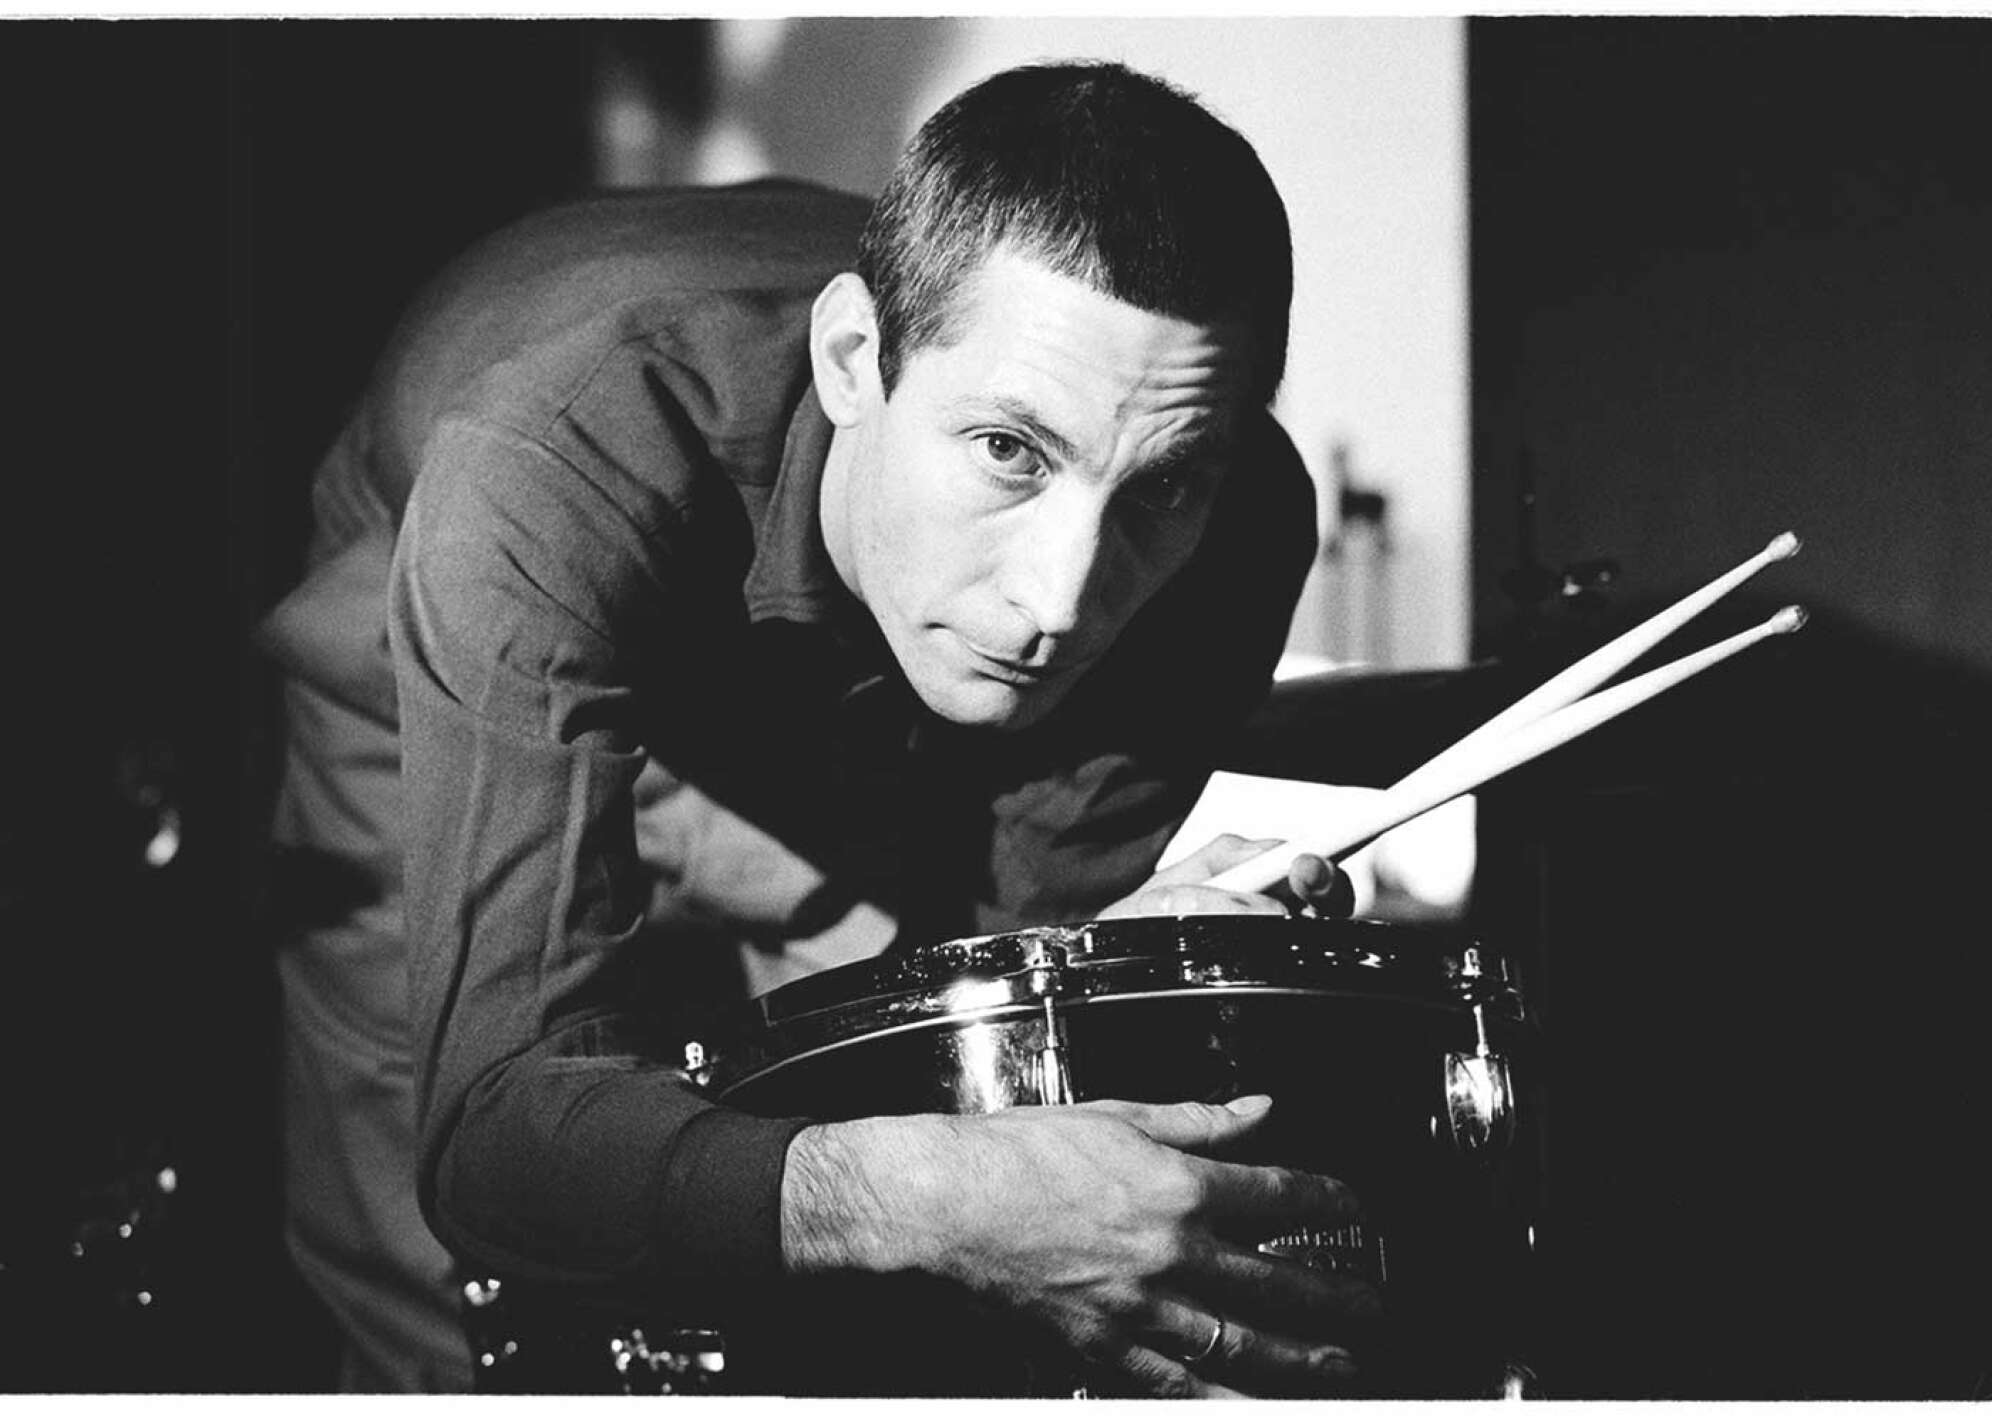 Charlie Watts – The Rolling Stones